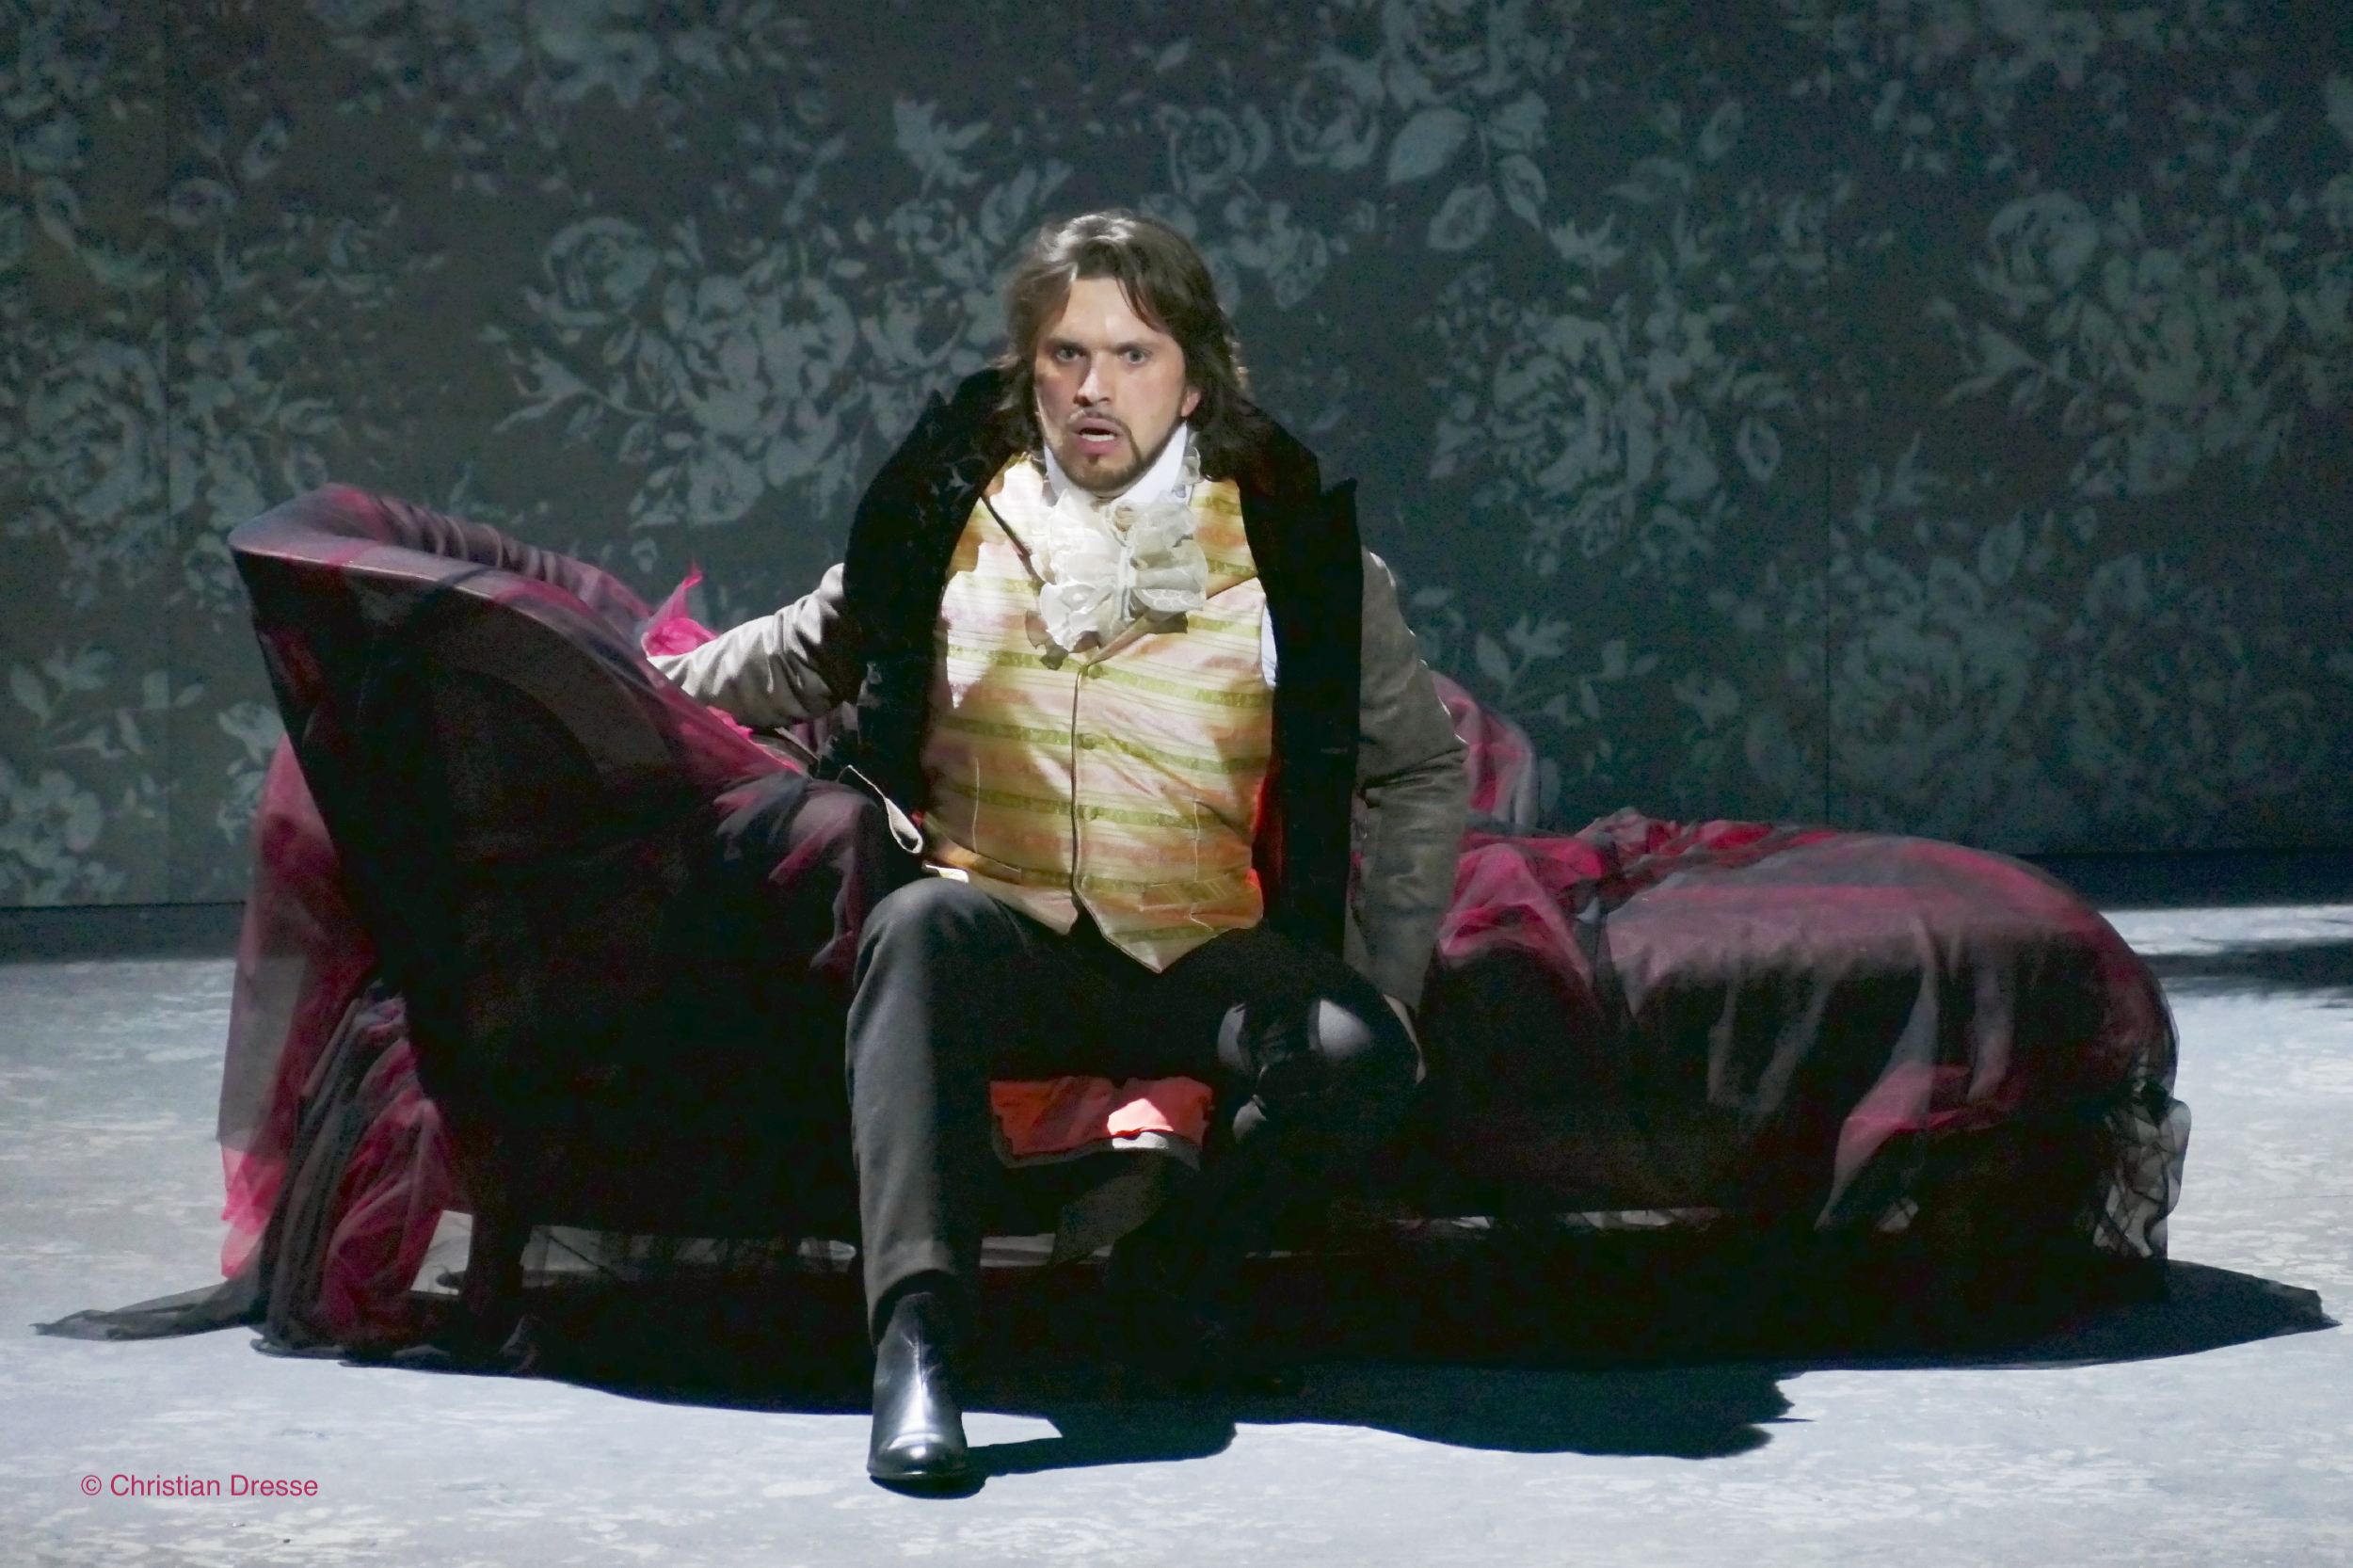 Update: Tosca at the Royal Opera House cancelled